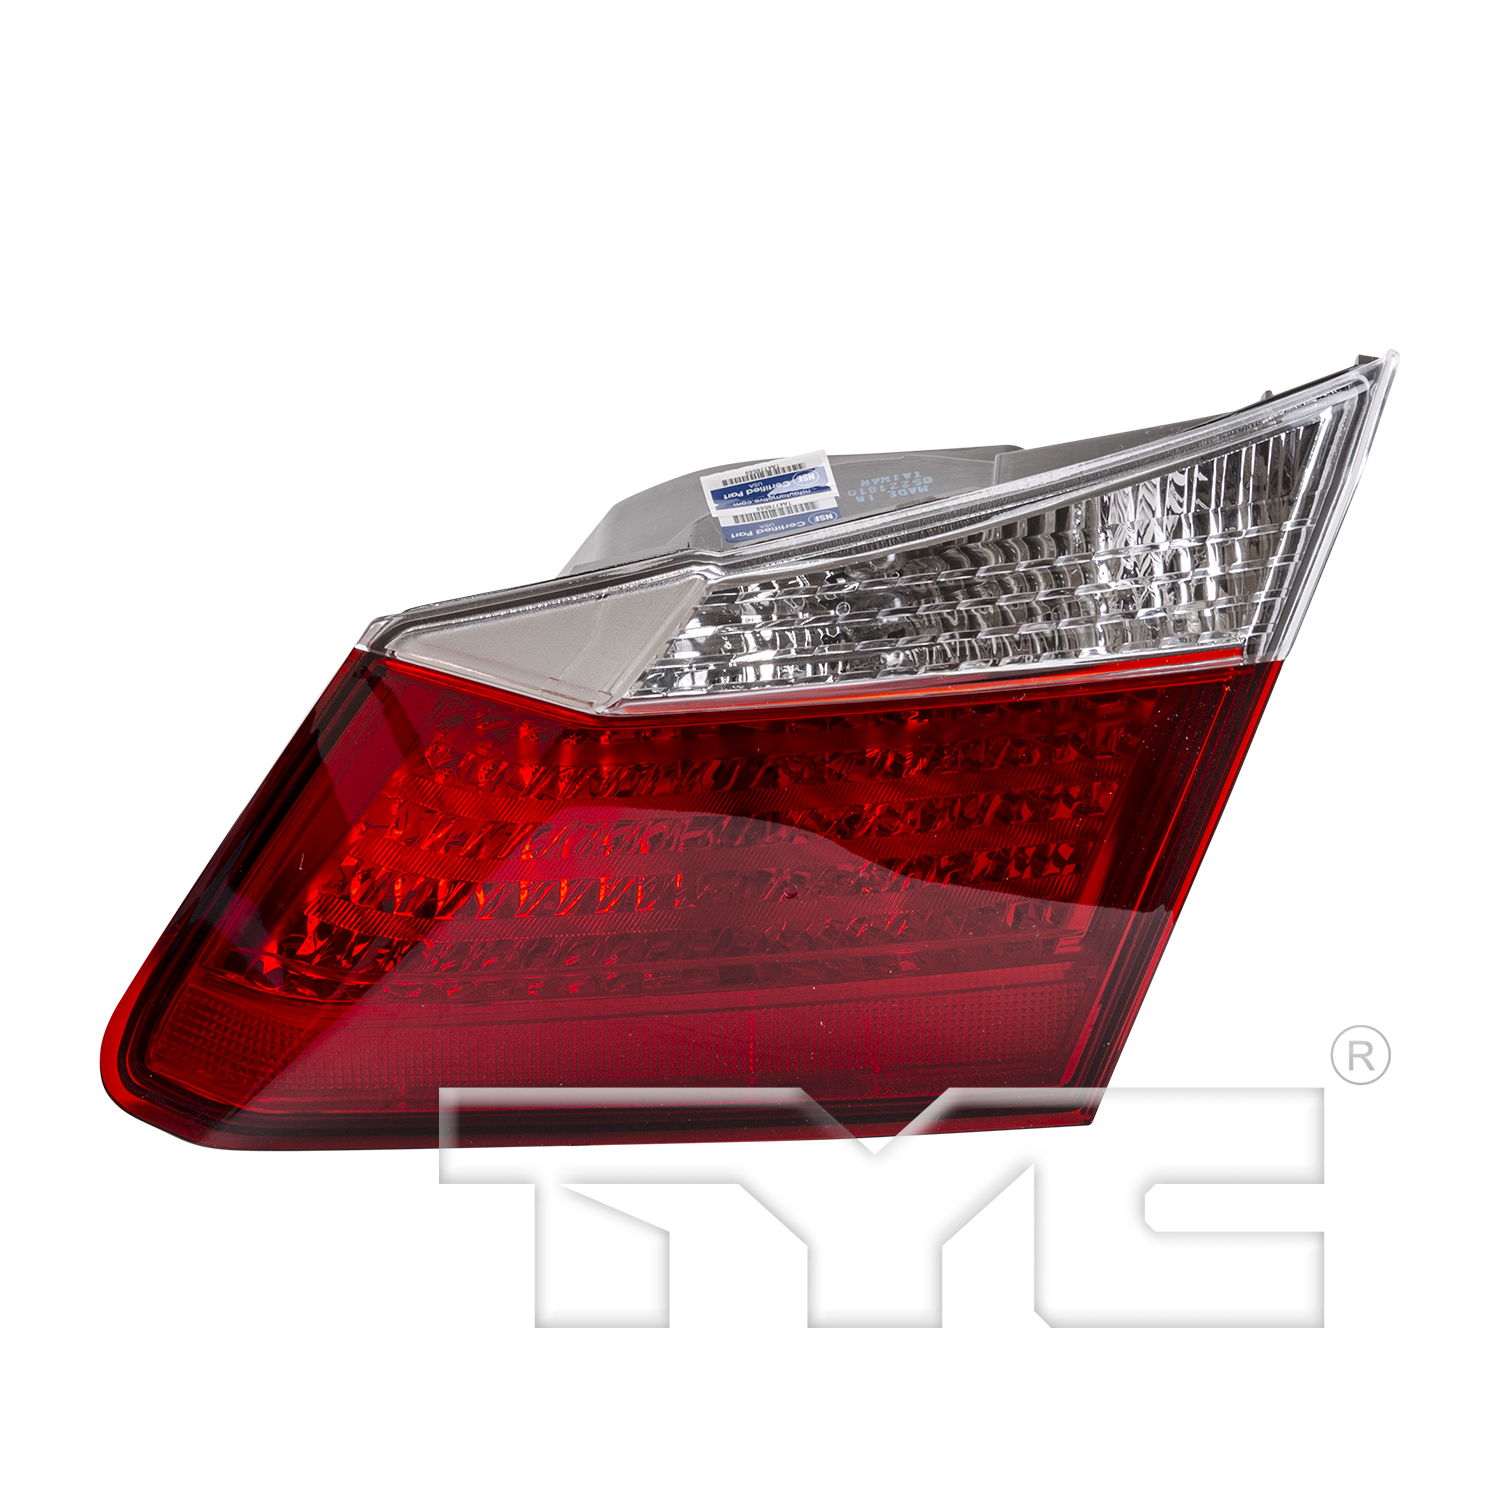 Aftermarket TAILLIGHTS for HONDA - ACCORD, ACCORD,13-15,RT Taillamp assy inner